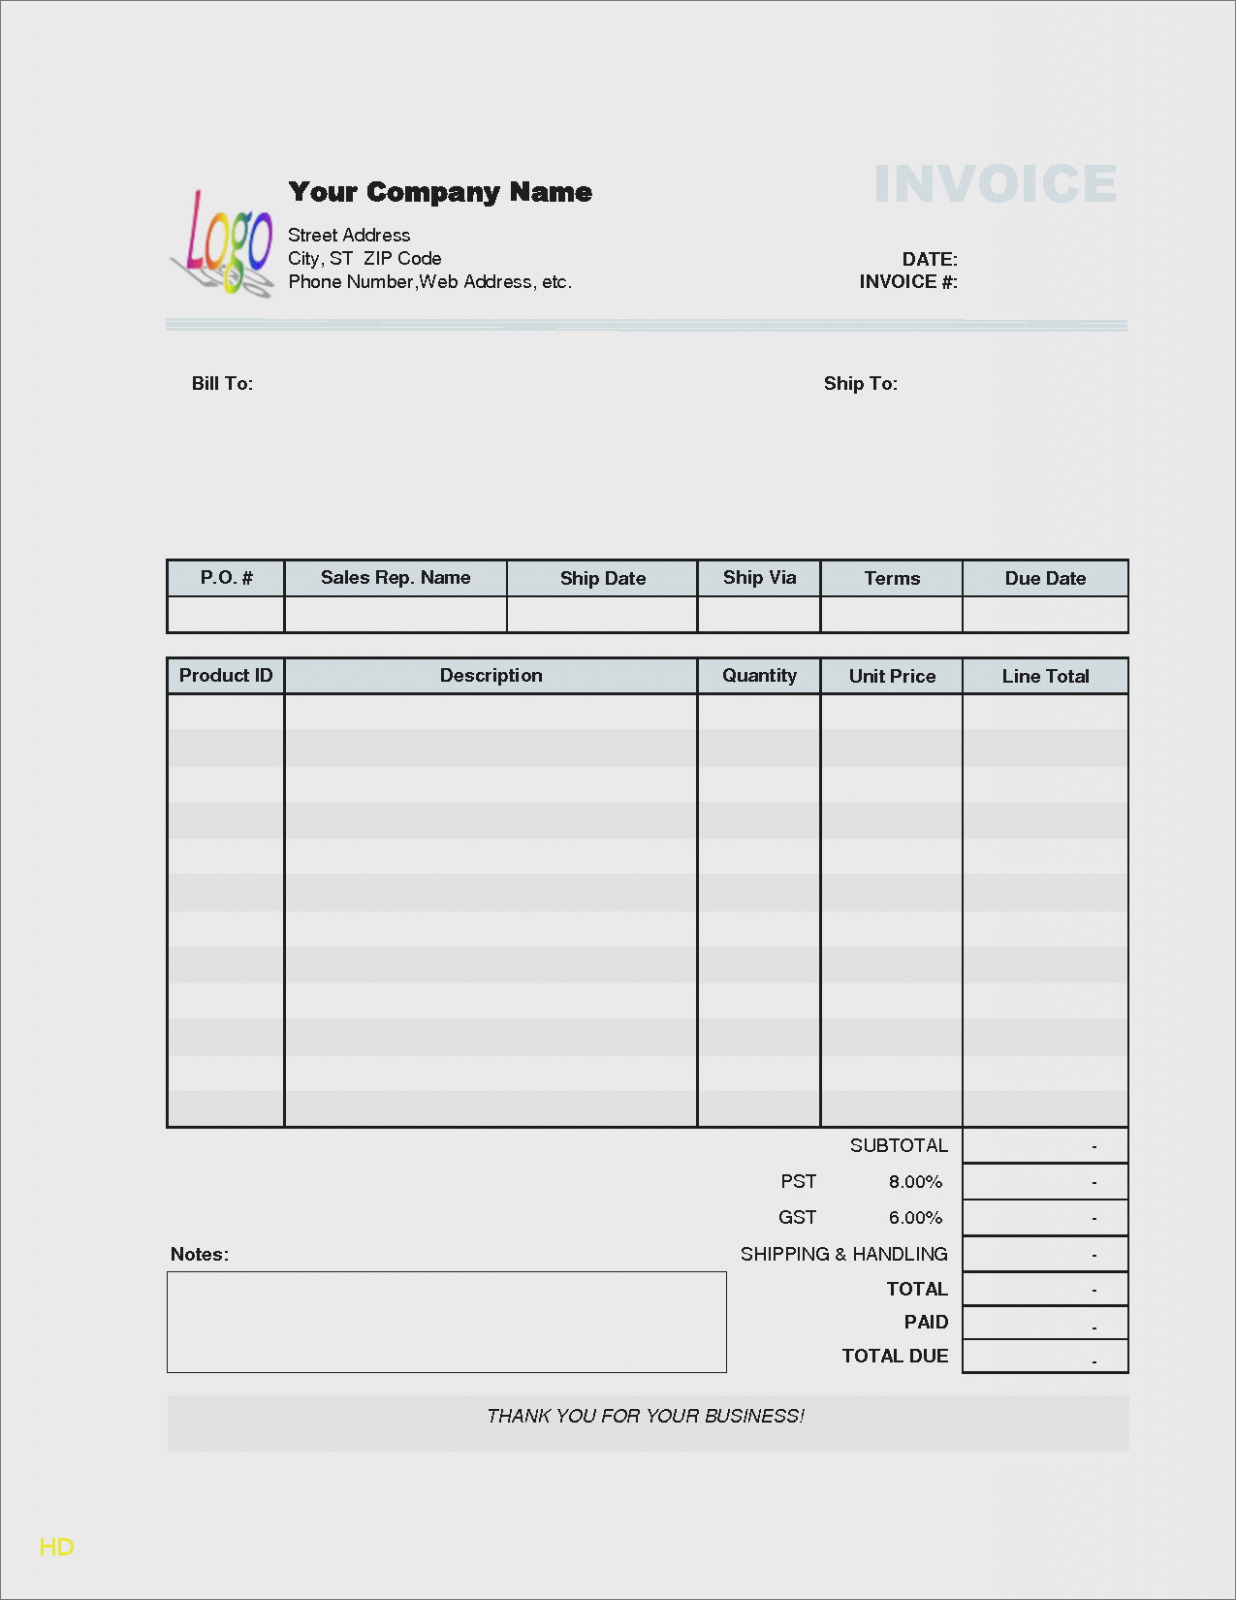 Dental Invoice Template Word Free Downloads 14 Beautiful Trucking and Dental Invoice